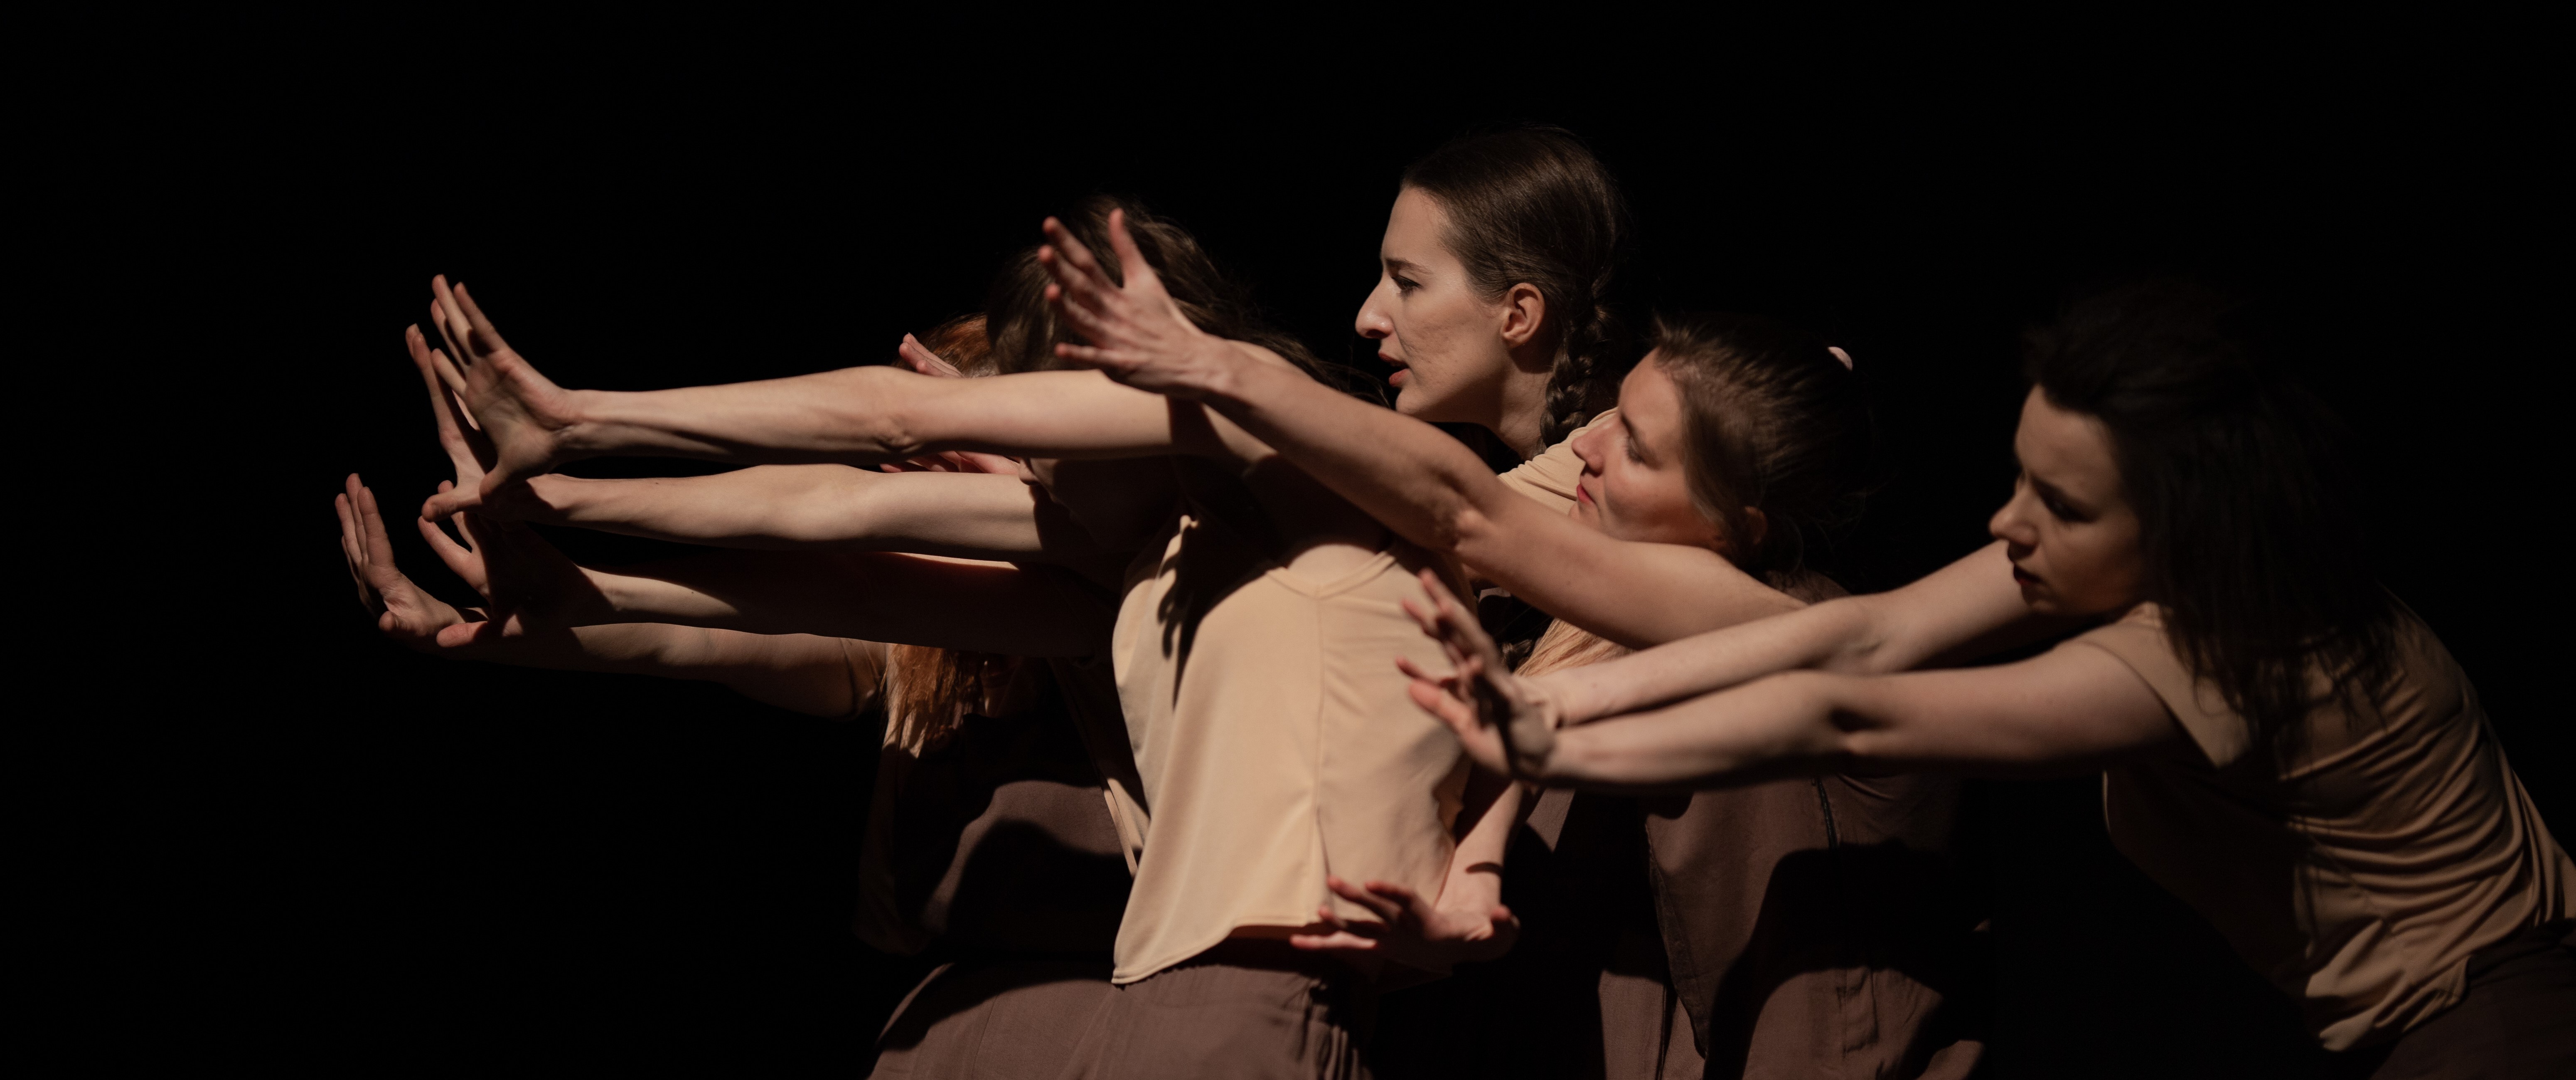 Photo shows group of young female dancers in beige and brown pushing left in a huddle on a darkened stage